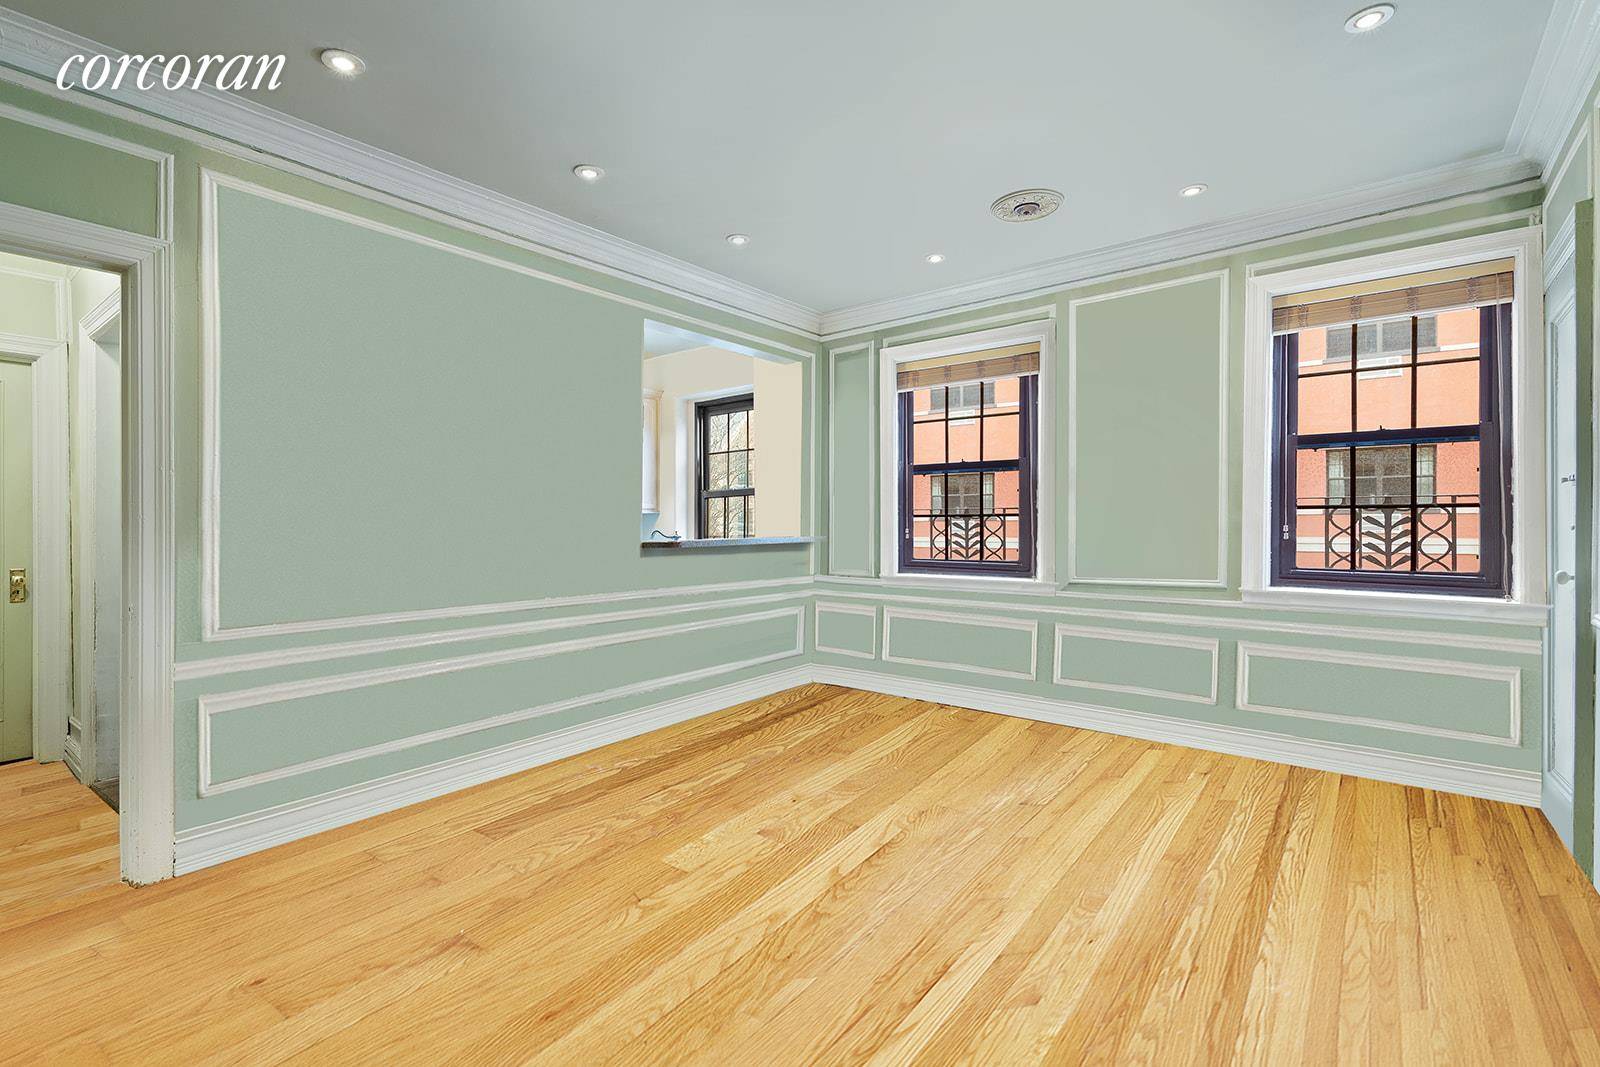 114 Clinton Street, apartment 4D is an oversized one bedroom replete with original pre war details including crown and decorative molding, plaster ceiling medallions, a cedar lined closet, hard wood ...